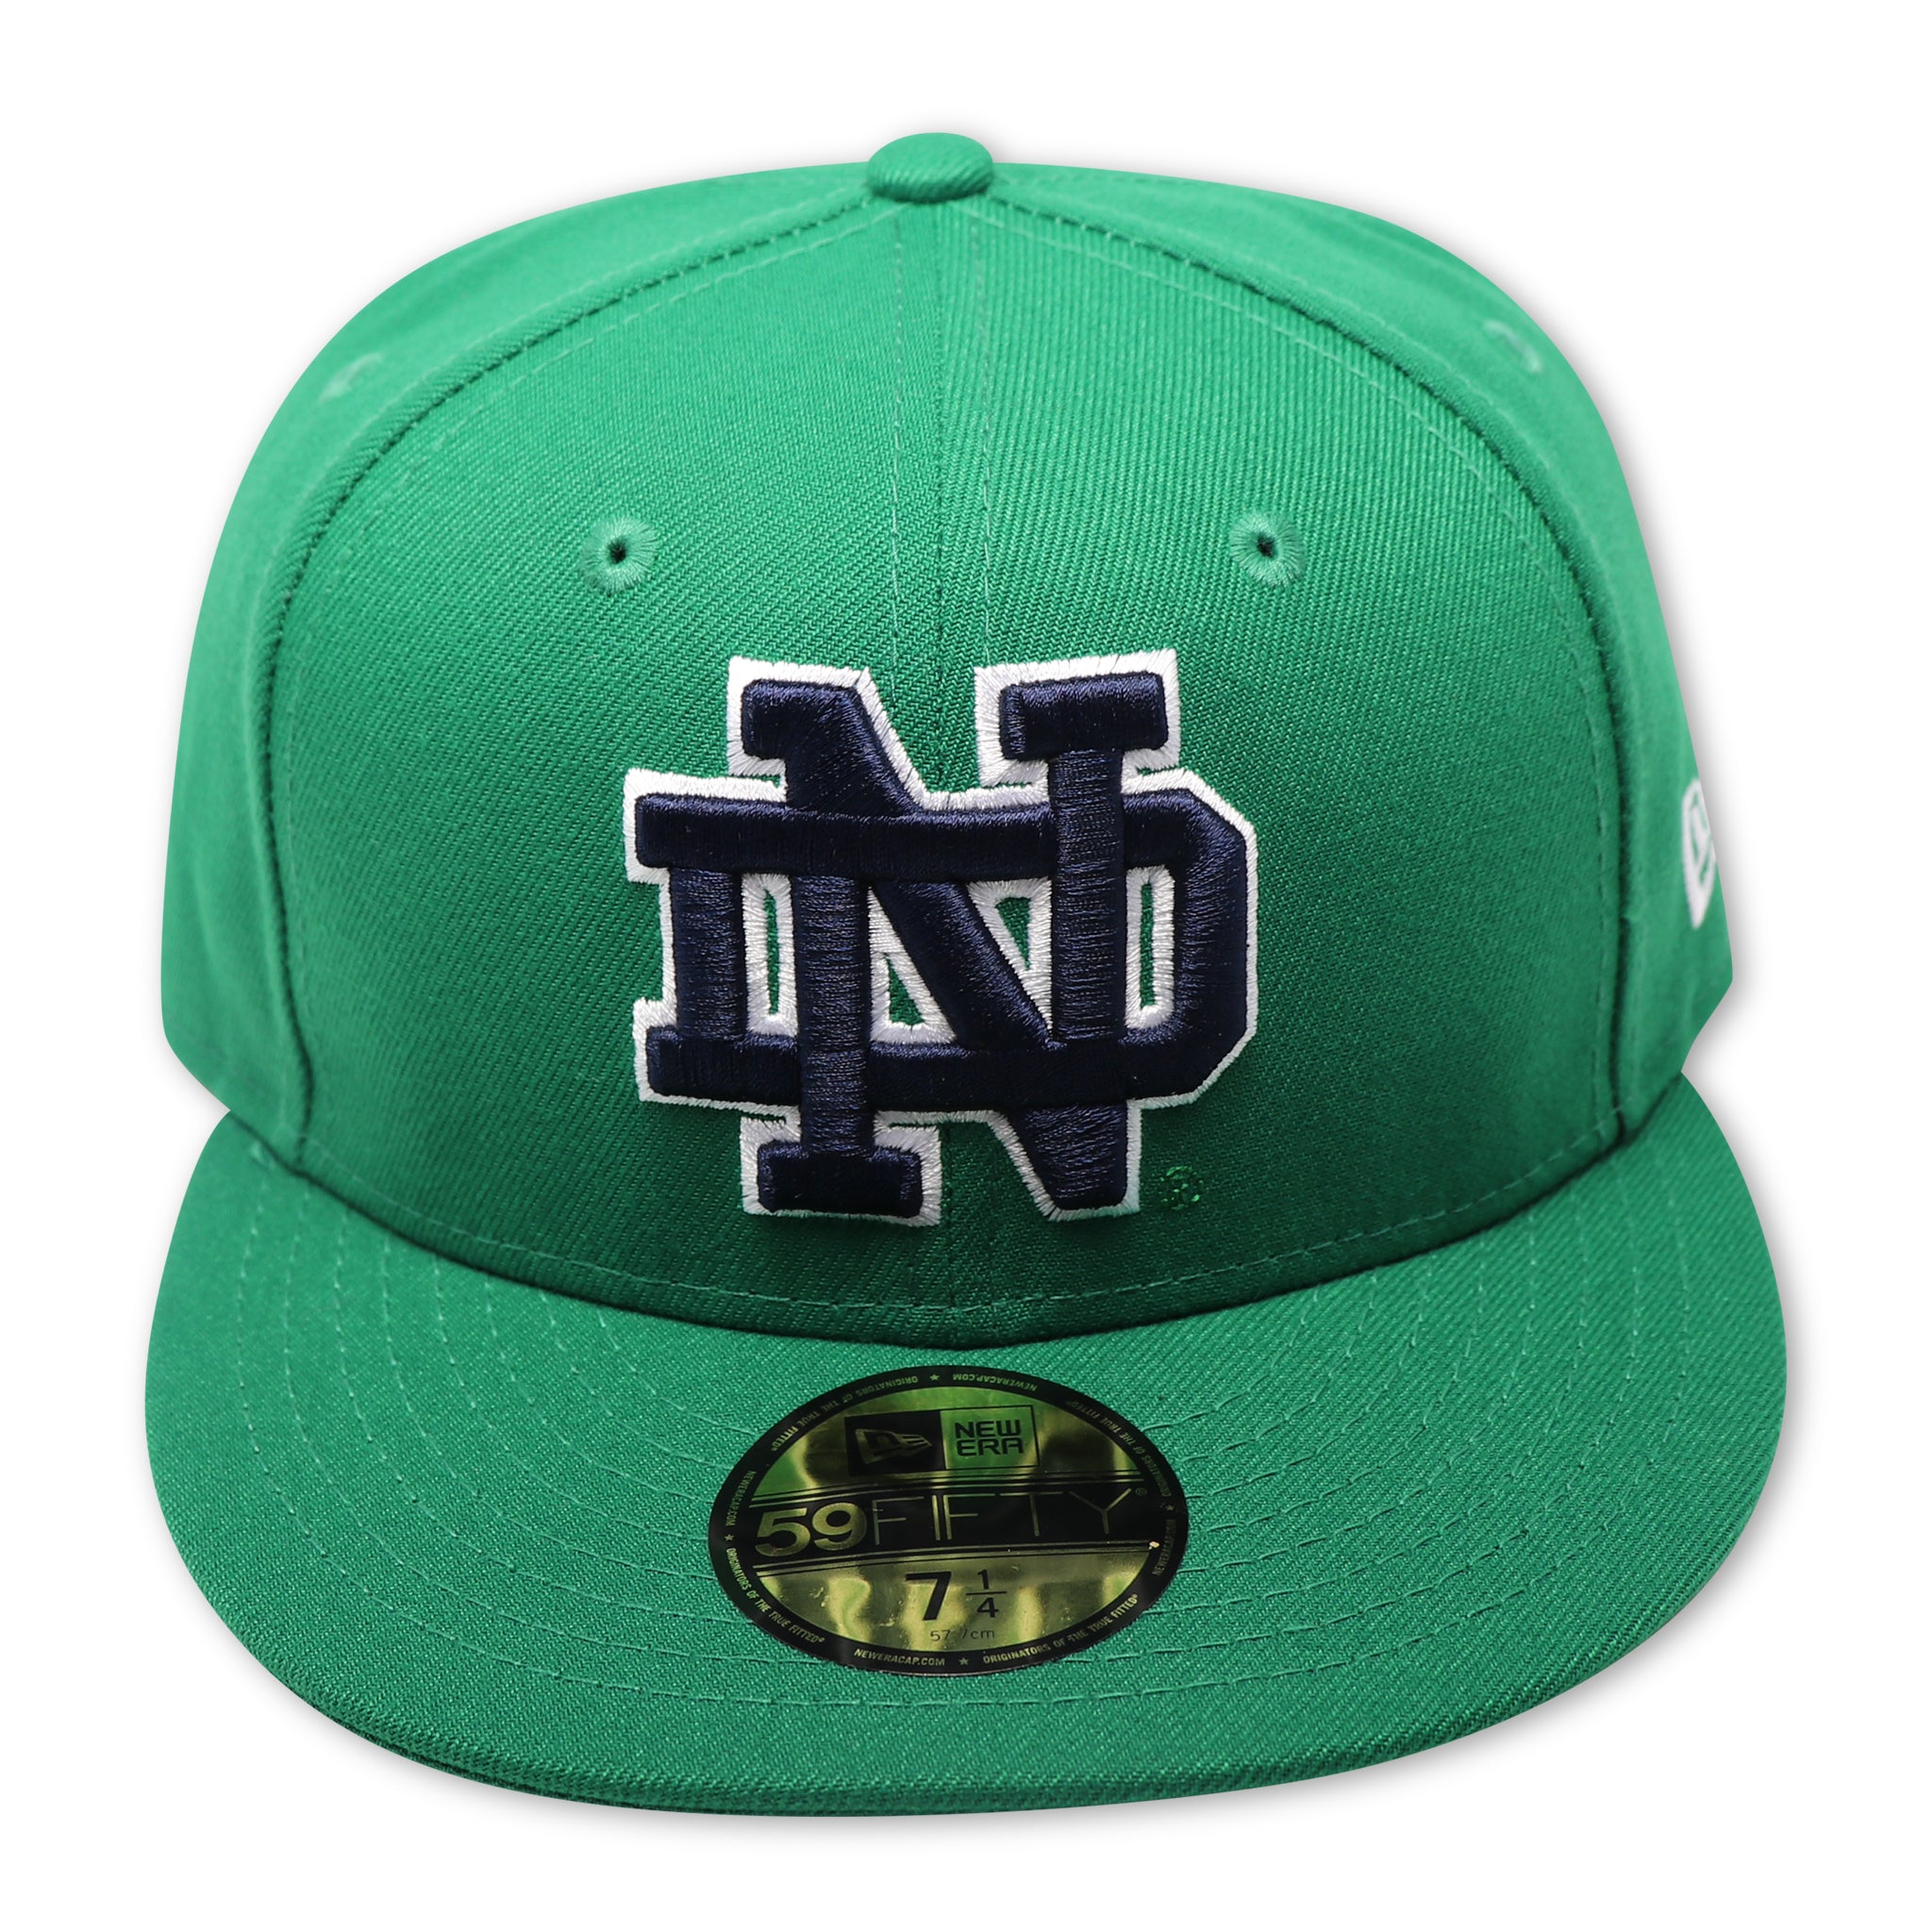 NOTRE DAME (GREEN) FIGHTNING IRISH NEW ERA 59FIFTY FITTED